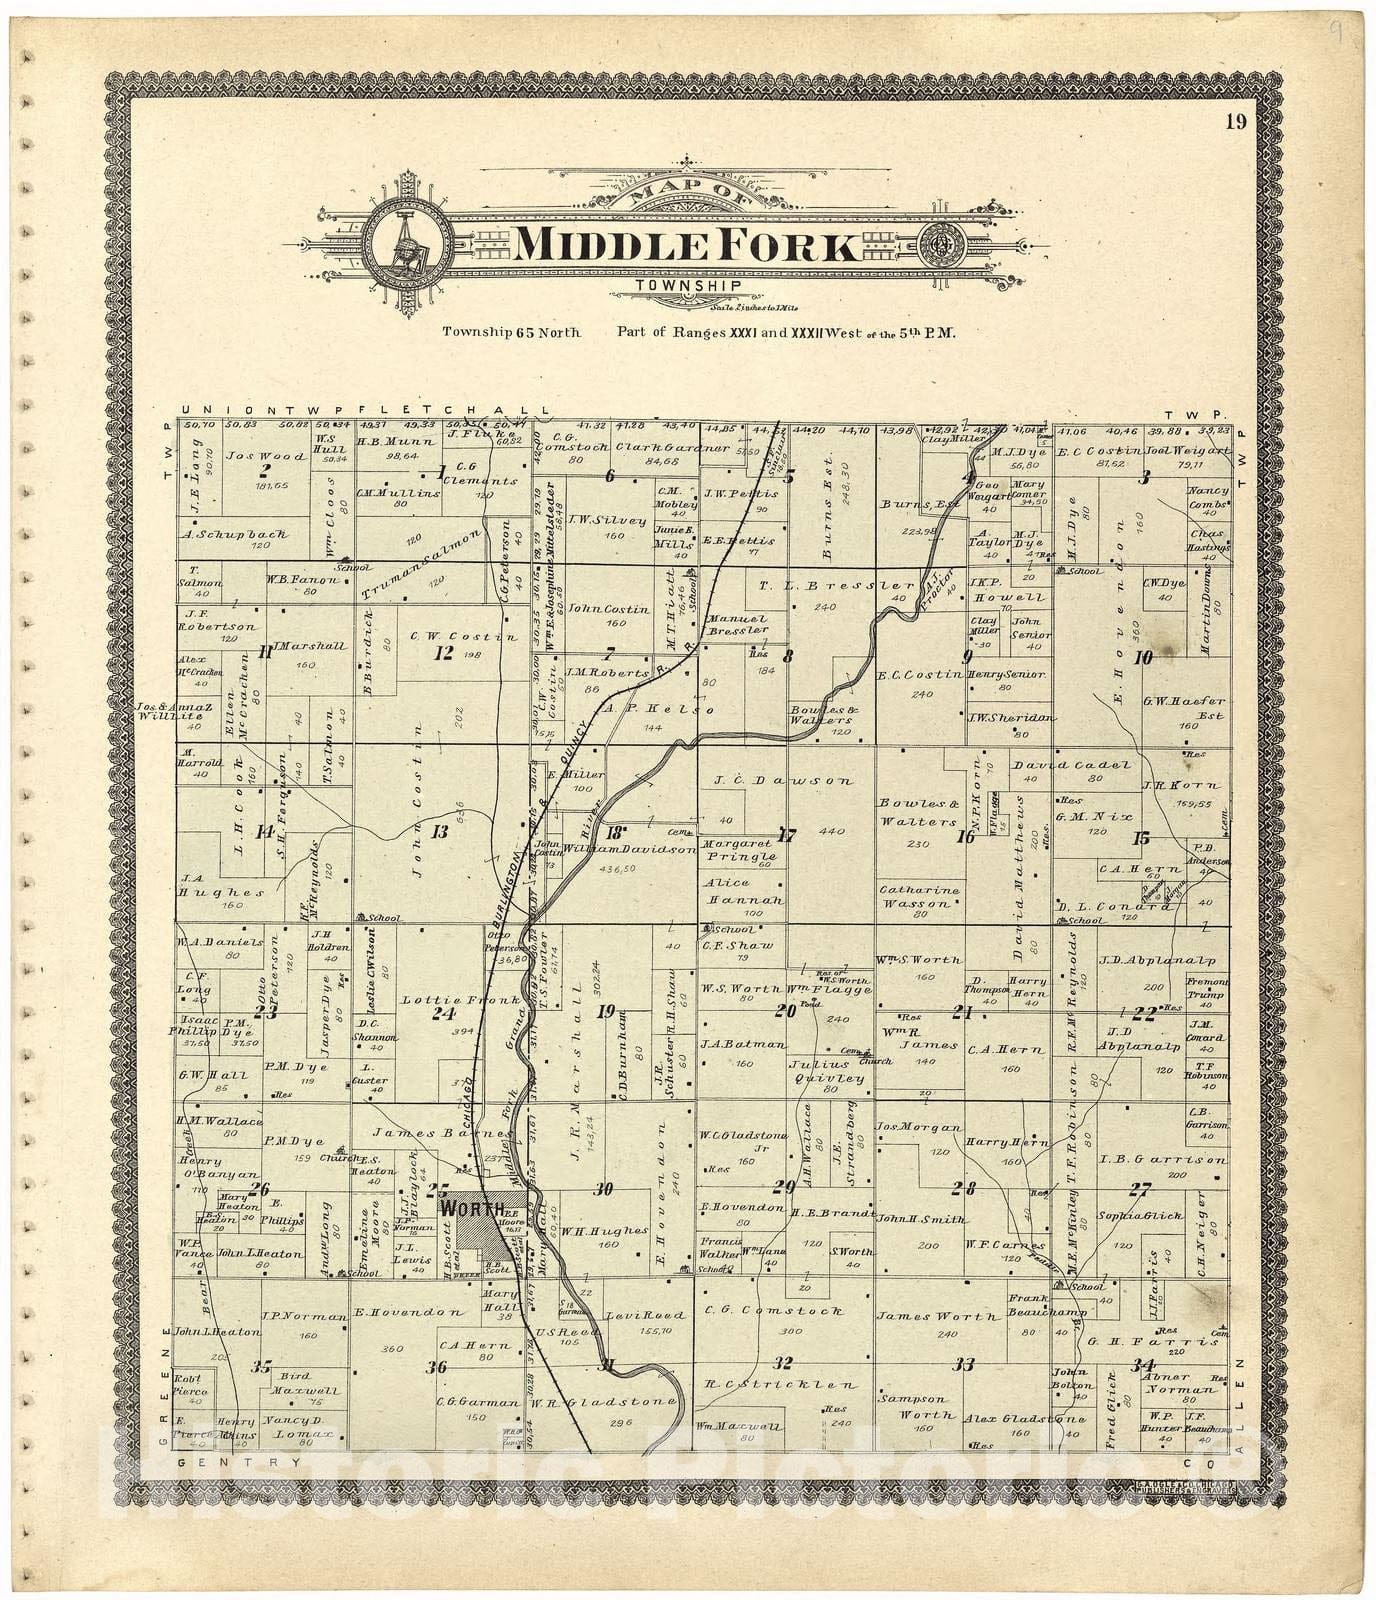 Historic 1902 Map - Standard Atlas of Worth County, Missouri - Map of Middle Fork Township